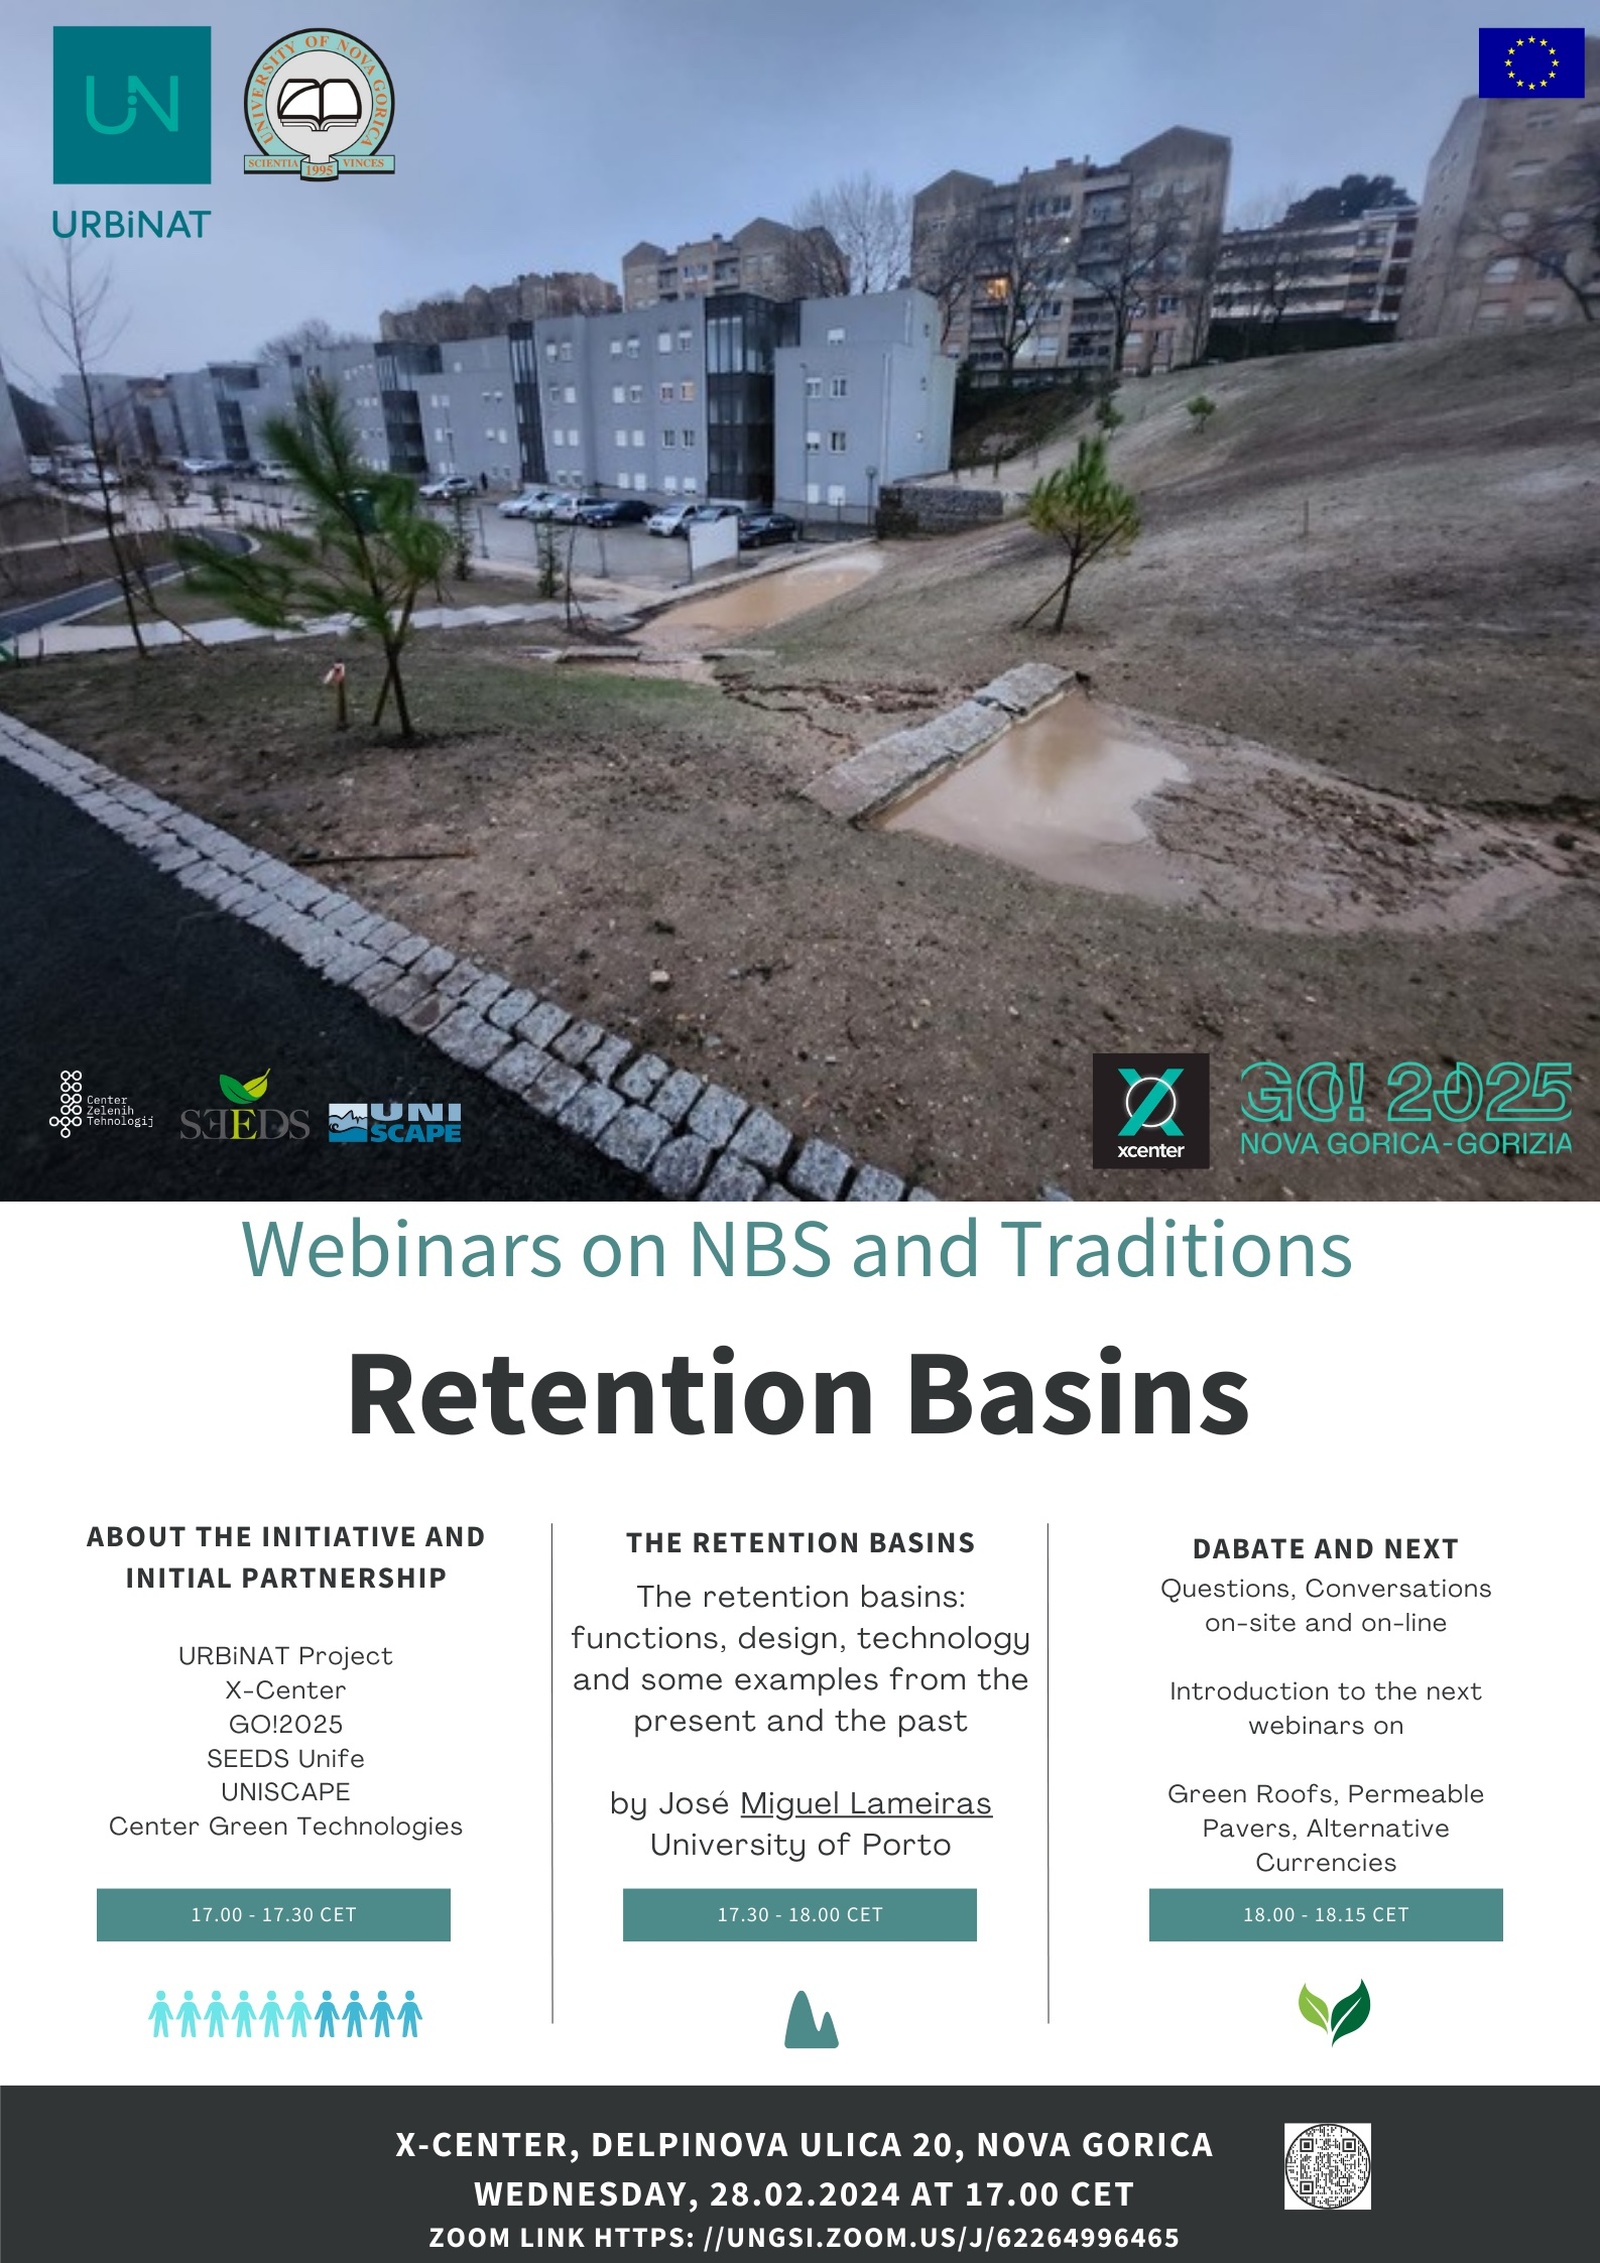 Vabilo - Webinar on NBS and Traditions (Retention Basins)